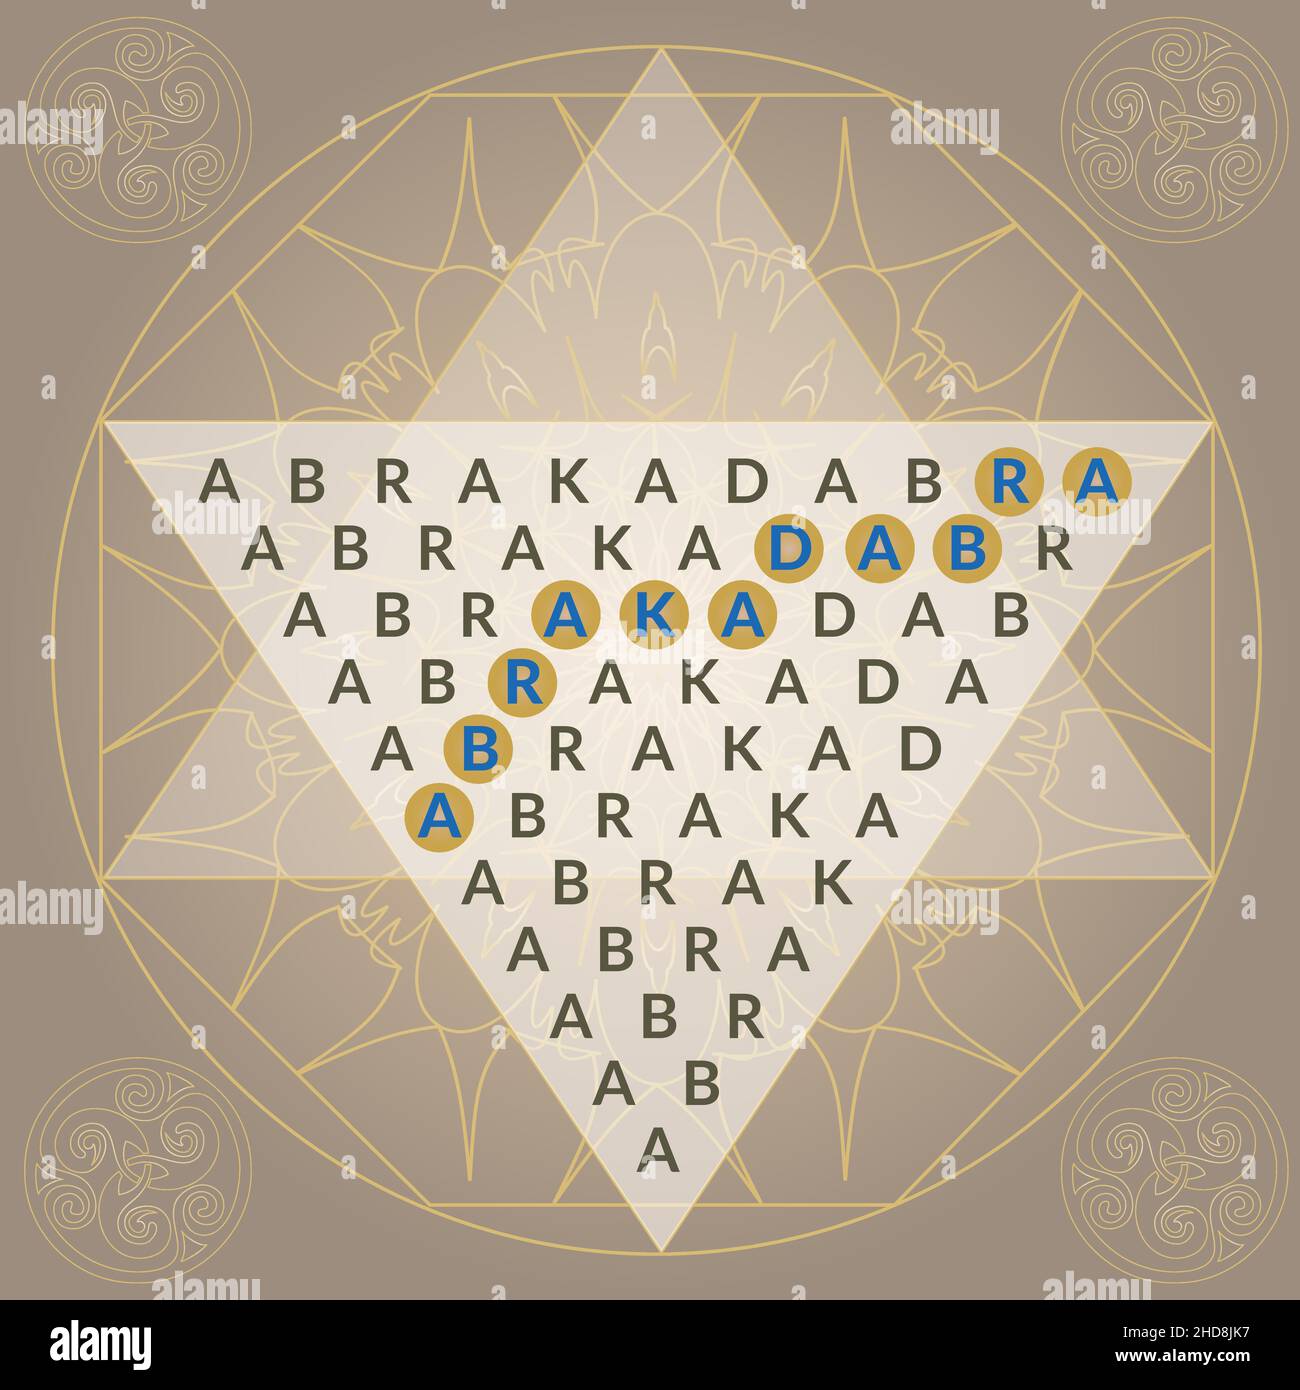 Abracadabra Magic Mantra Illustration within Triangle, Octagon and Circle Stock Vector